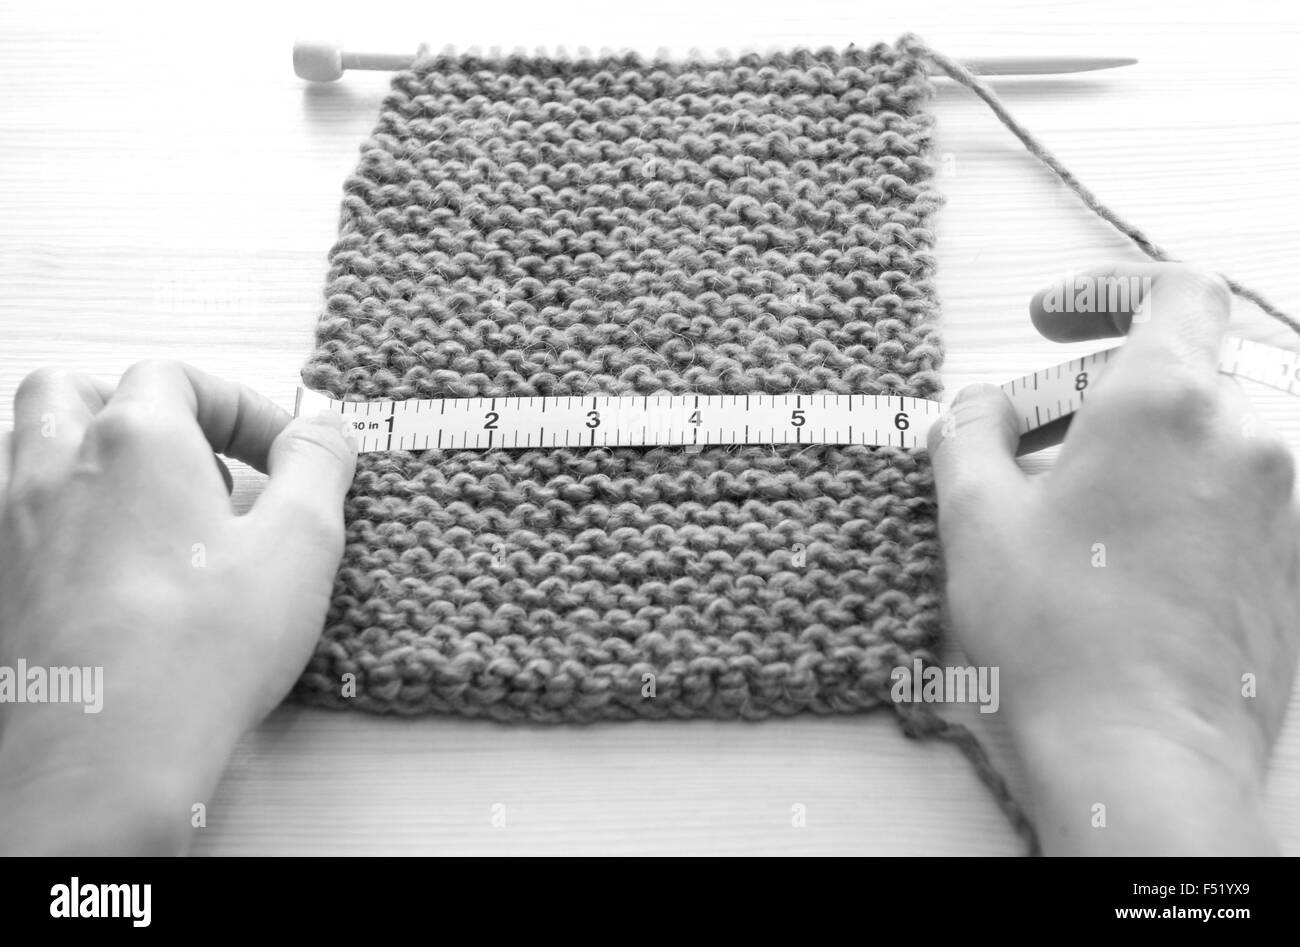 Two hands hold a tape measure across a piece of knitting on a wooden table, measuring in inches - monochrome processing Stock Photo